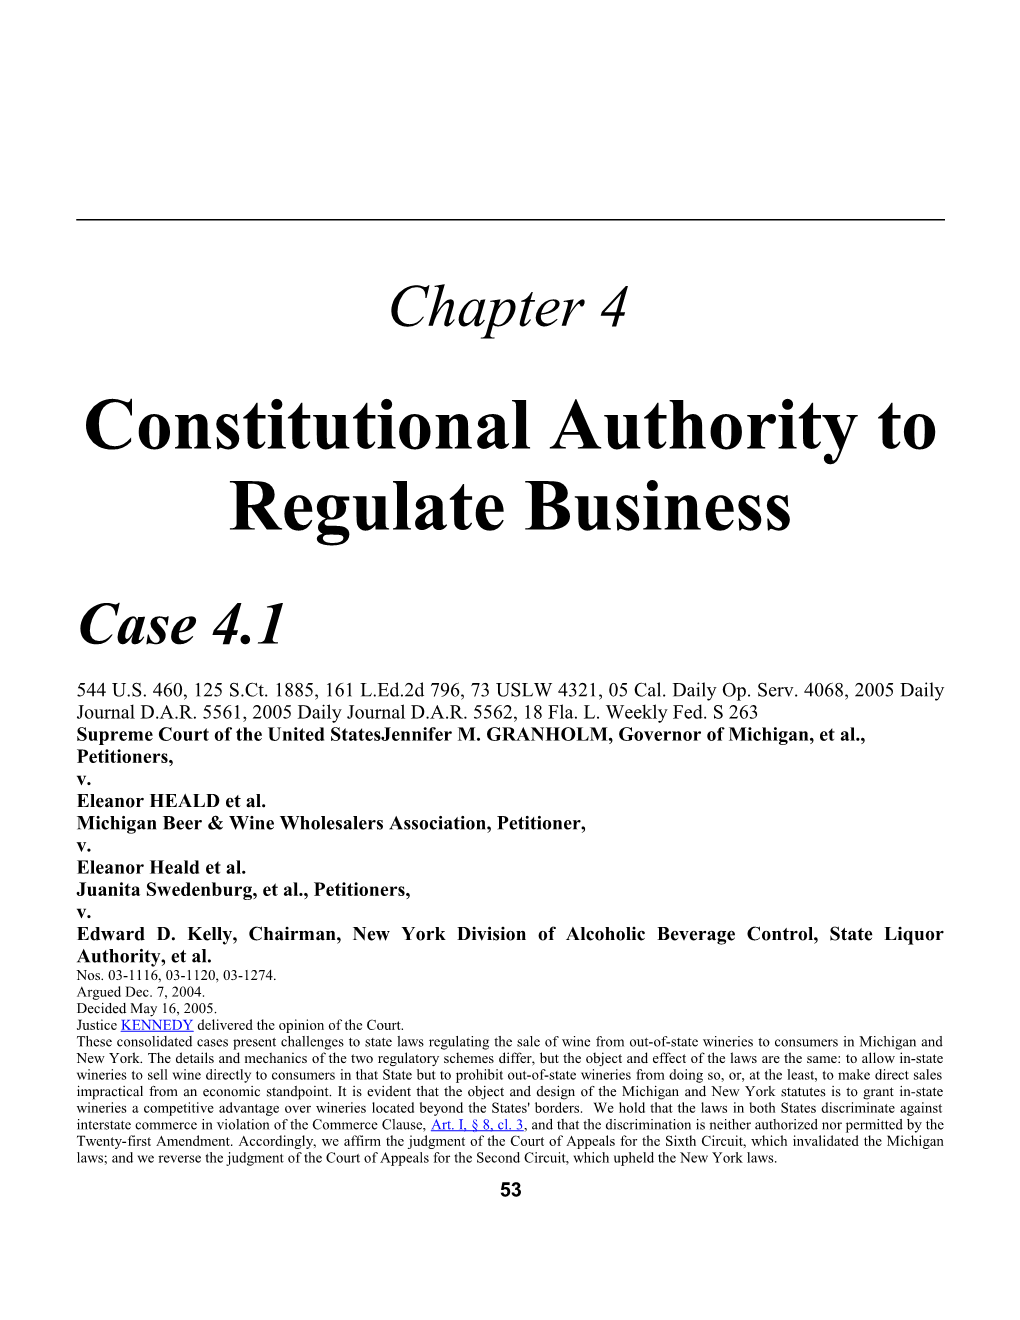 Constitutional Authority to Regulate Business